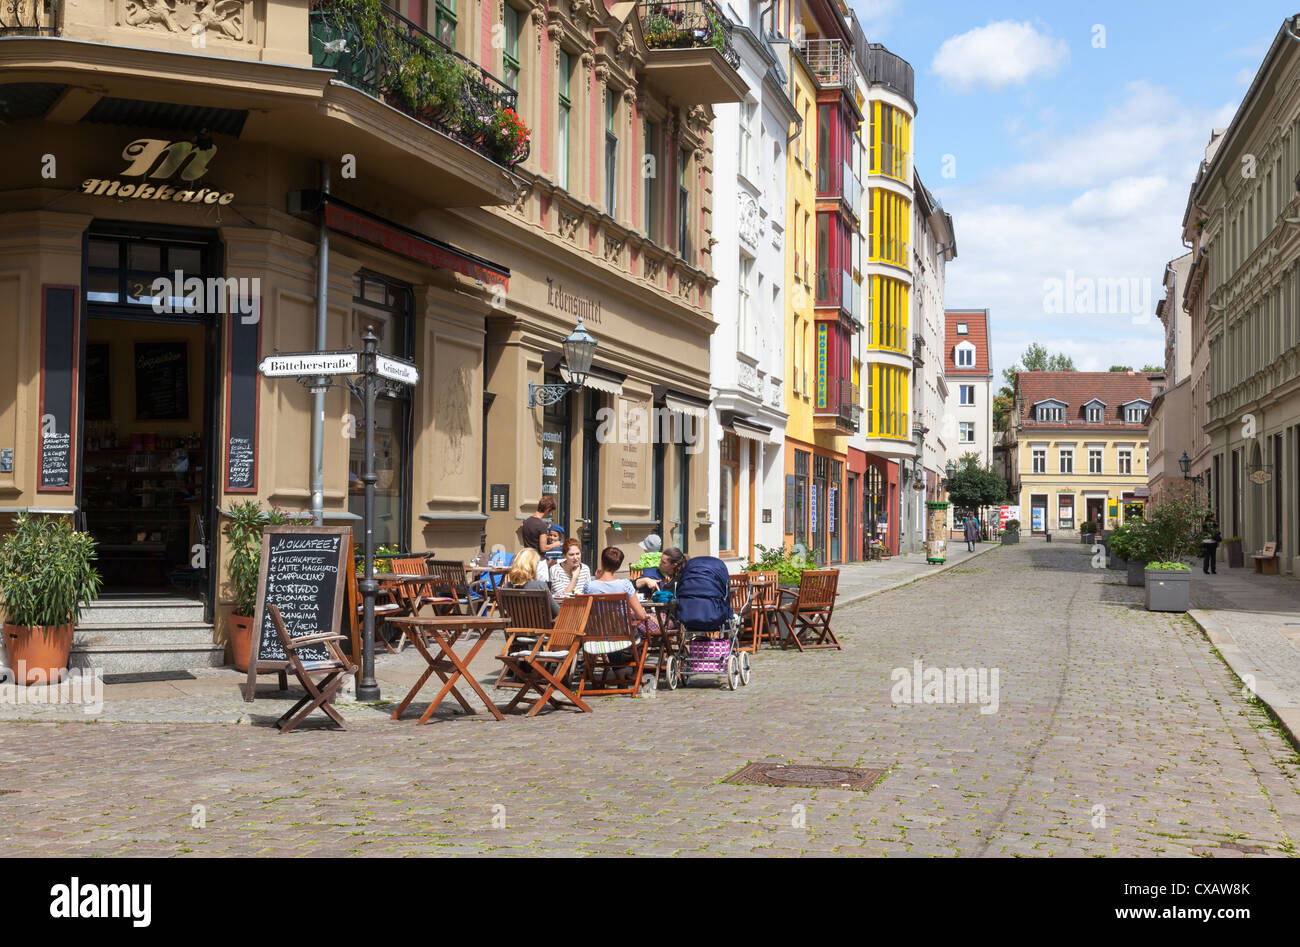 street and cafe by Town Hall, Koepenick, Berlin, Germany Stock Photo